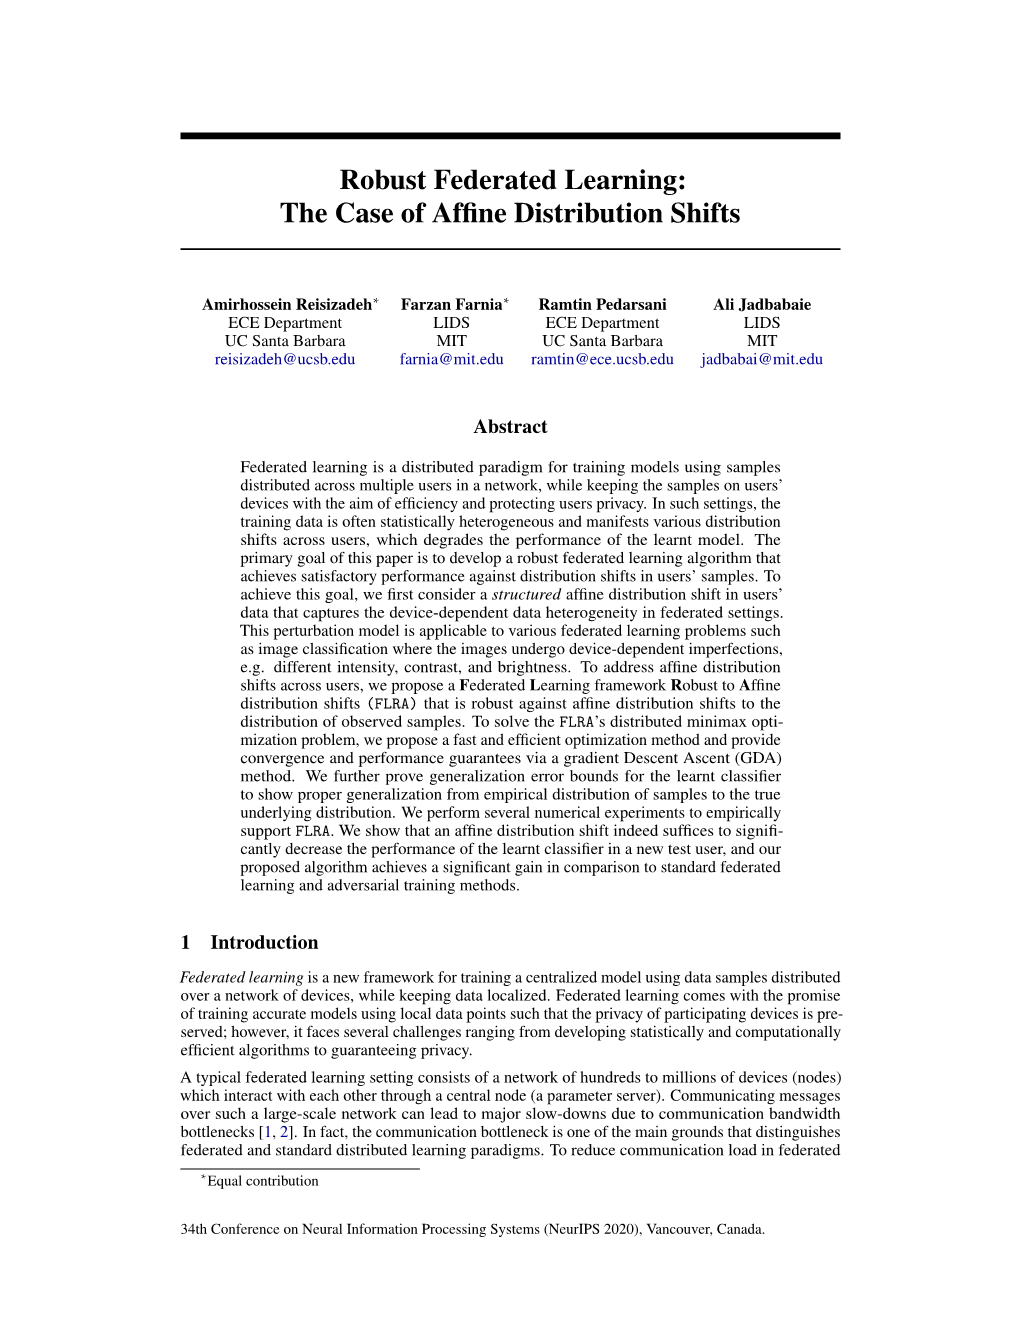 Robust Federated Learning: the Case of Affine Distribution Shifts